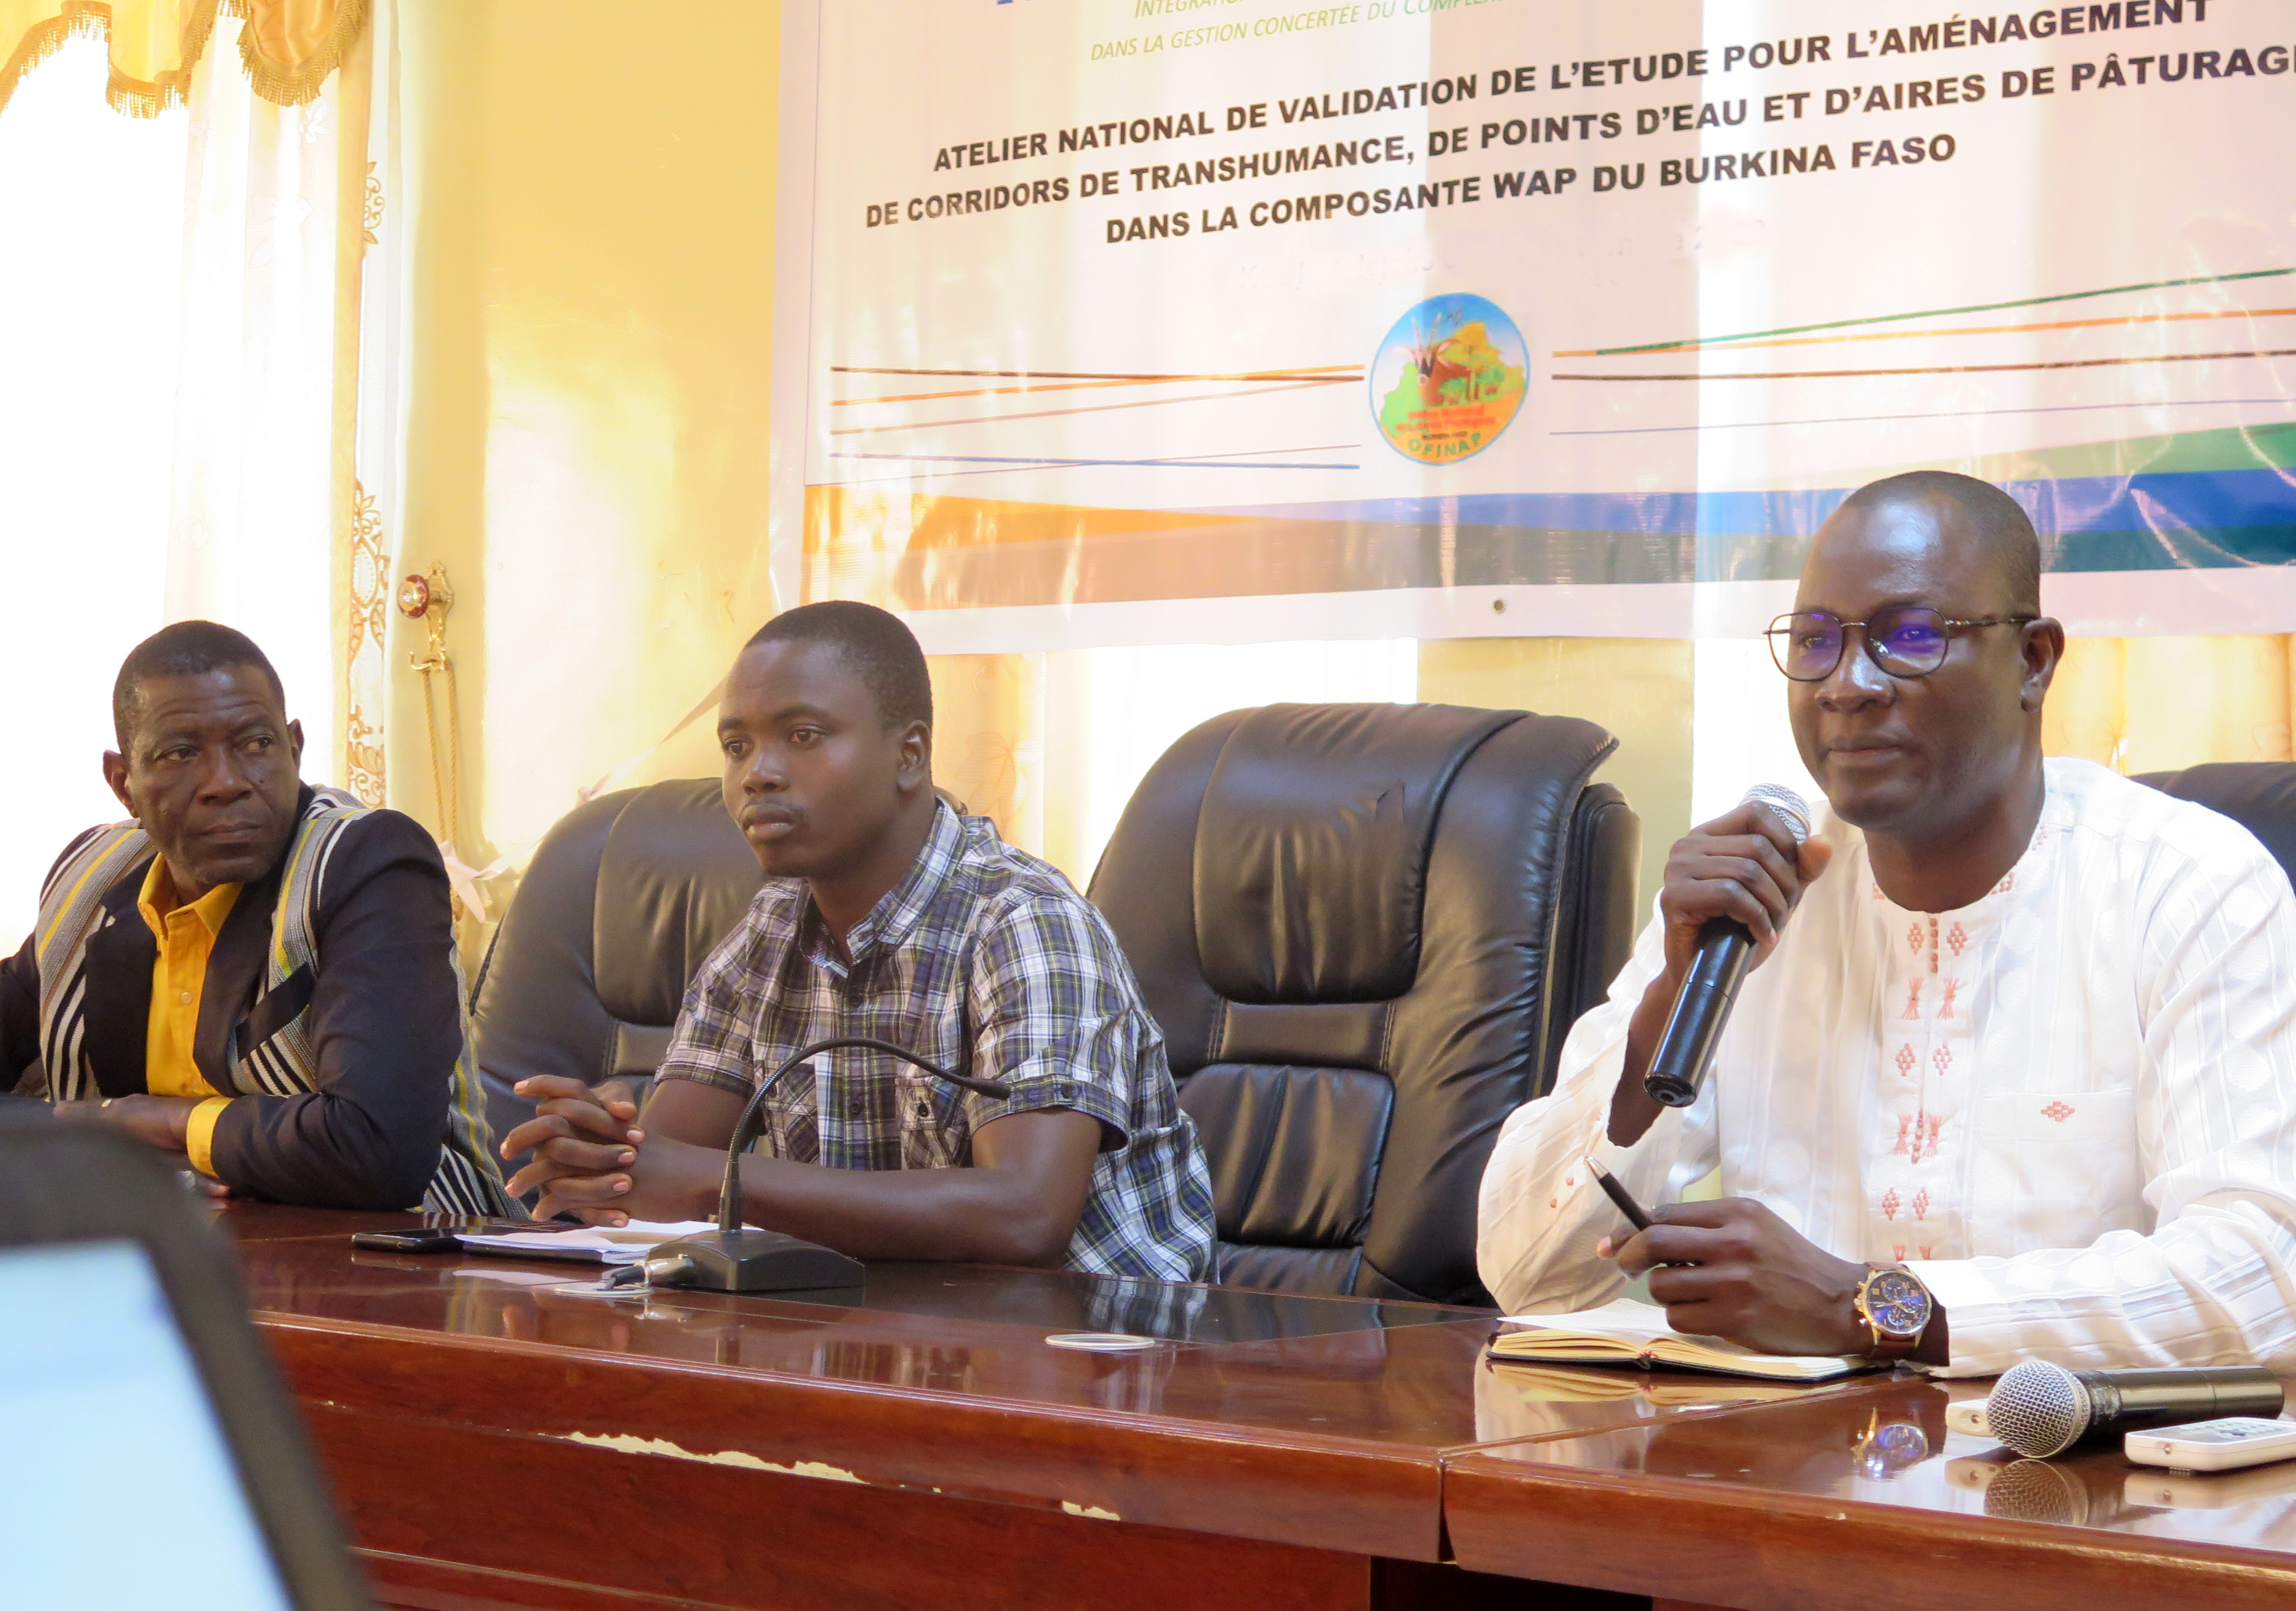  AdaptWAP: Validation workshop of the study for the development of transhumance corridors, water points and grazing areas, Burkina Faso 